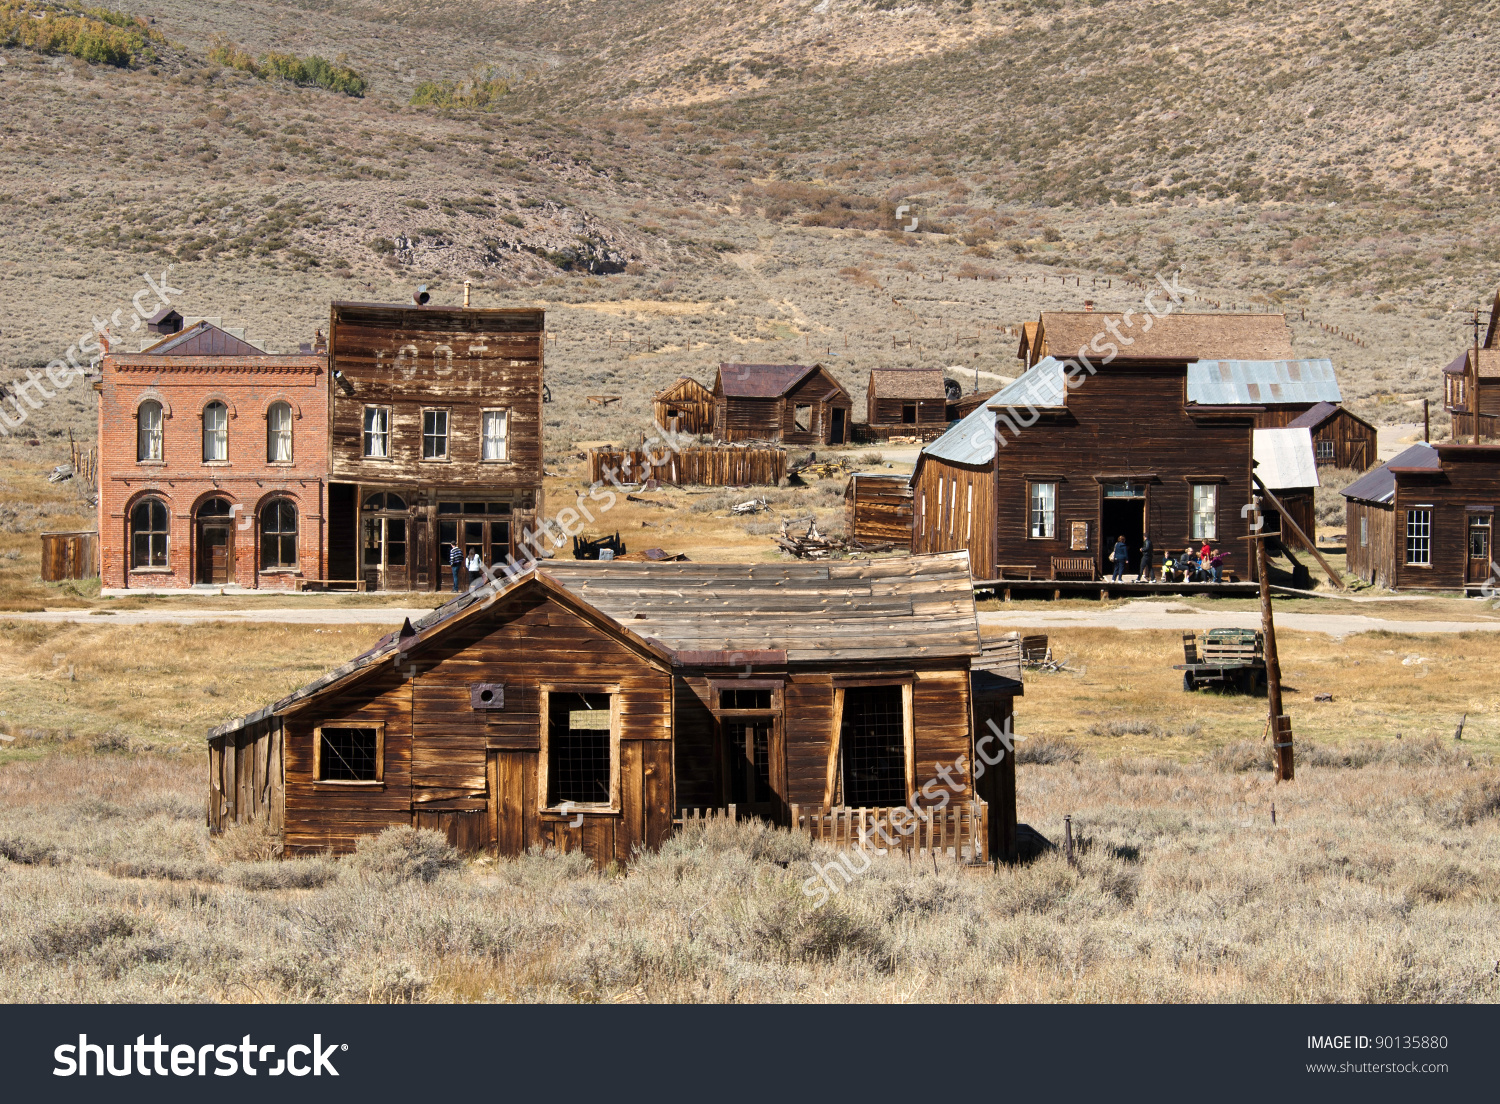 Bodie Ghost Town California State Park Stock Photo 90135880.